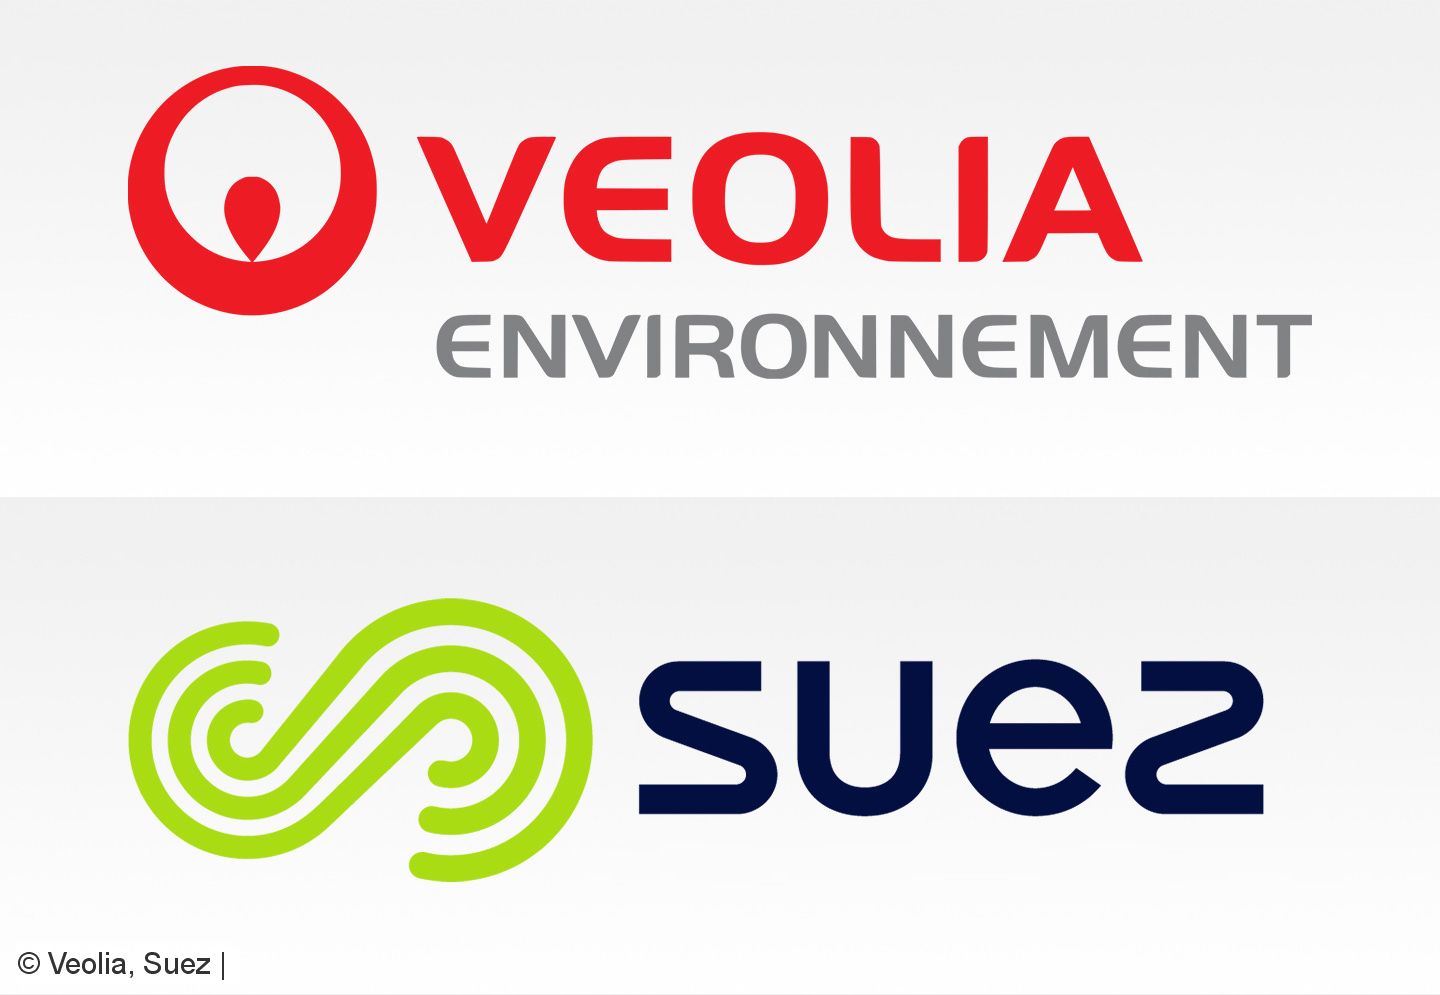 Image combining the logo of Veolia in its upper half and the logo of Suez in the lower half. 